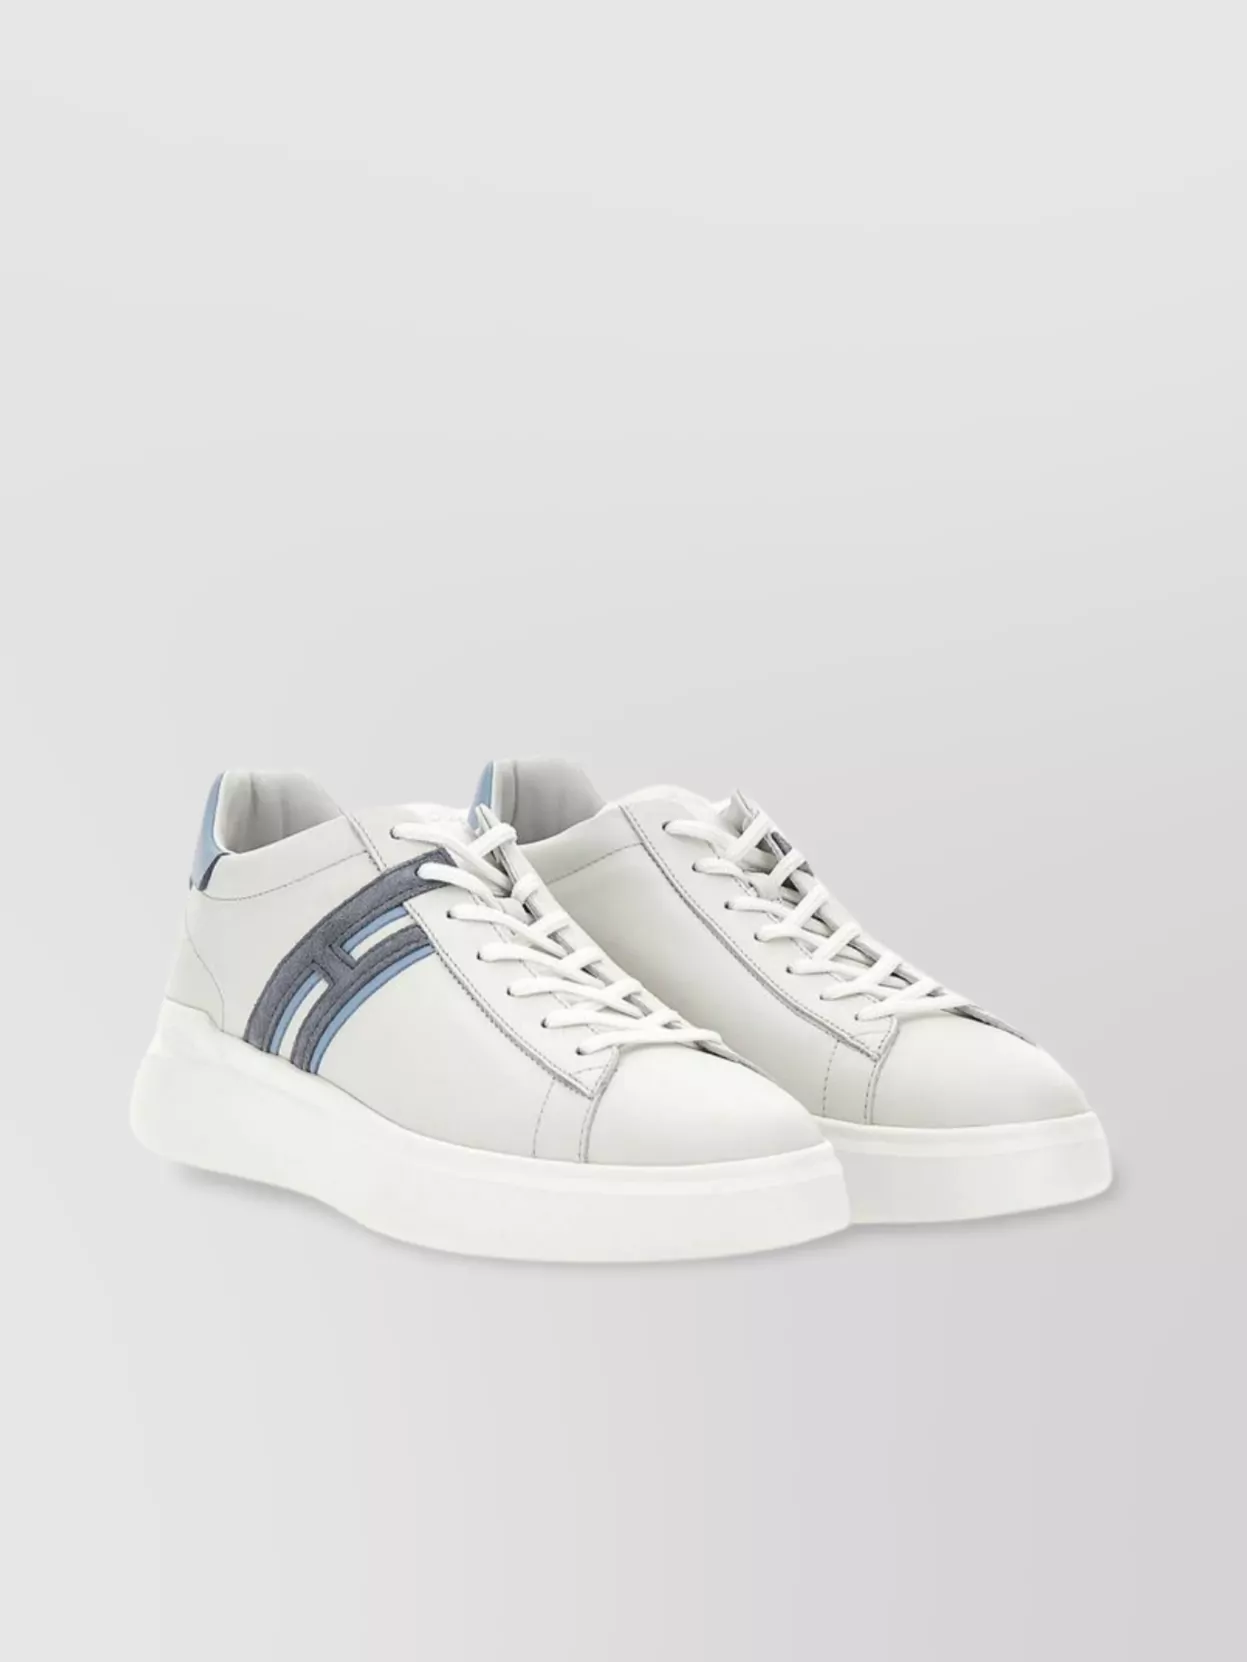 Shop Hogan Leather Sneakers With Color Block Design